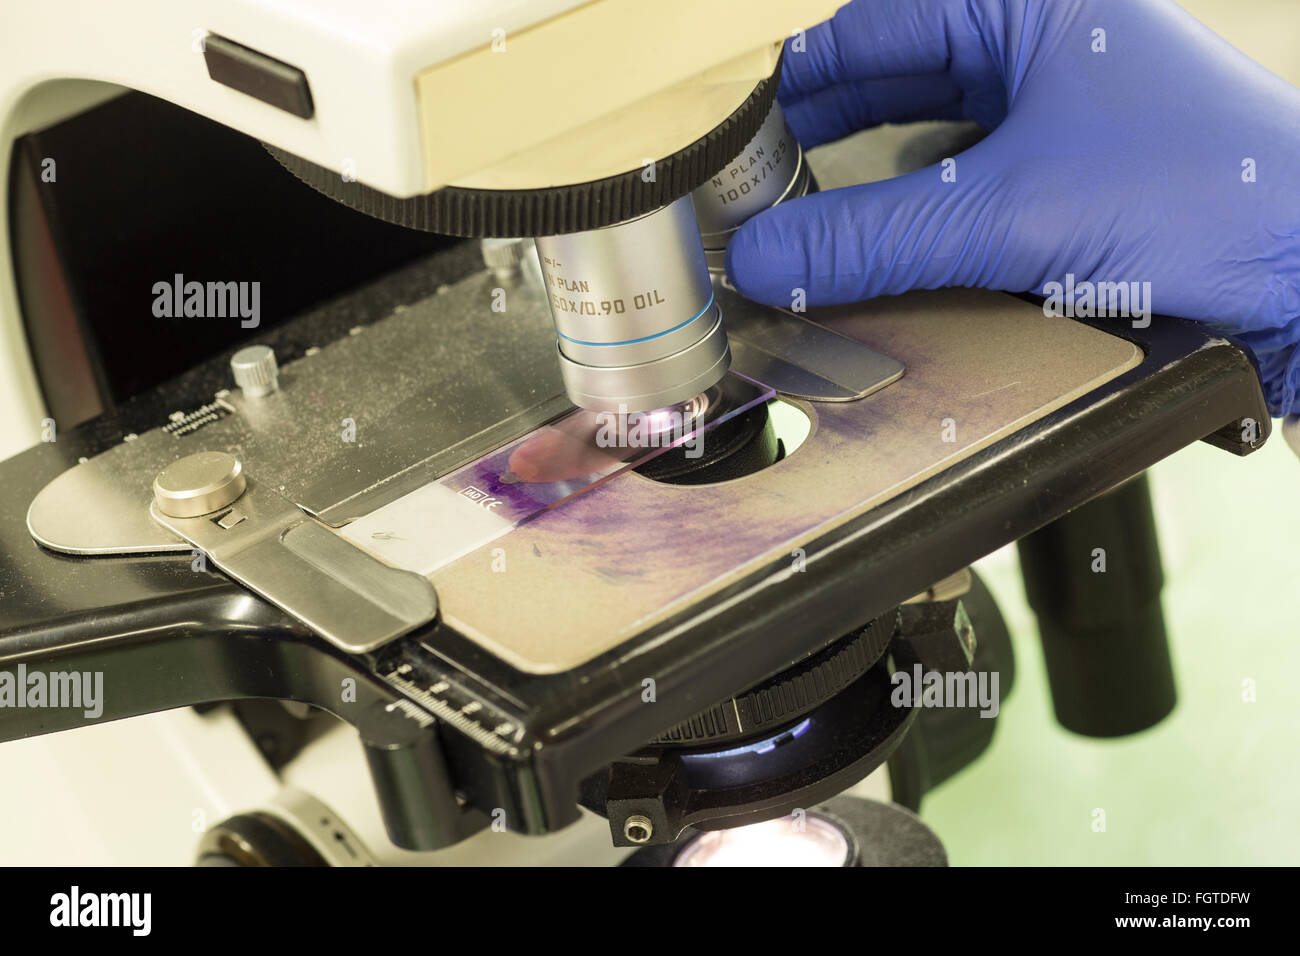 Blood sample being checked under a microscope in a hospital pathology laboratory. Stock Photo